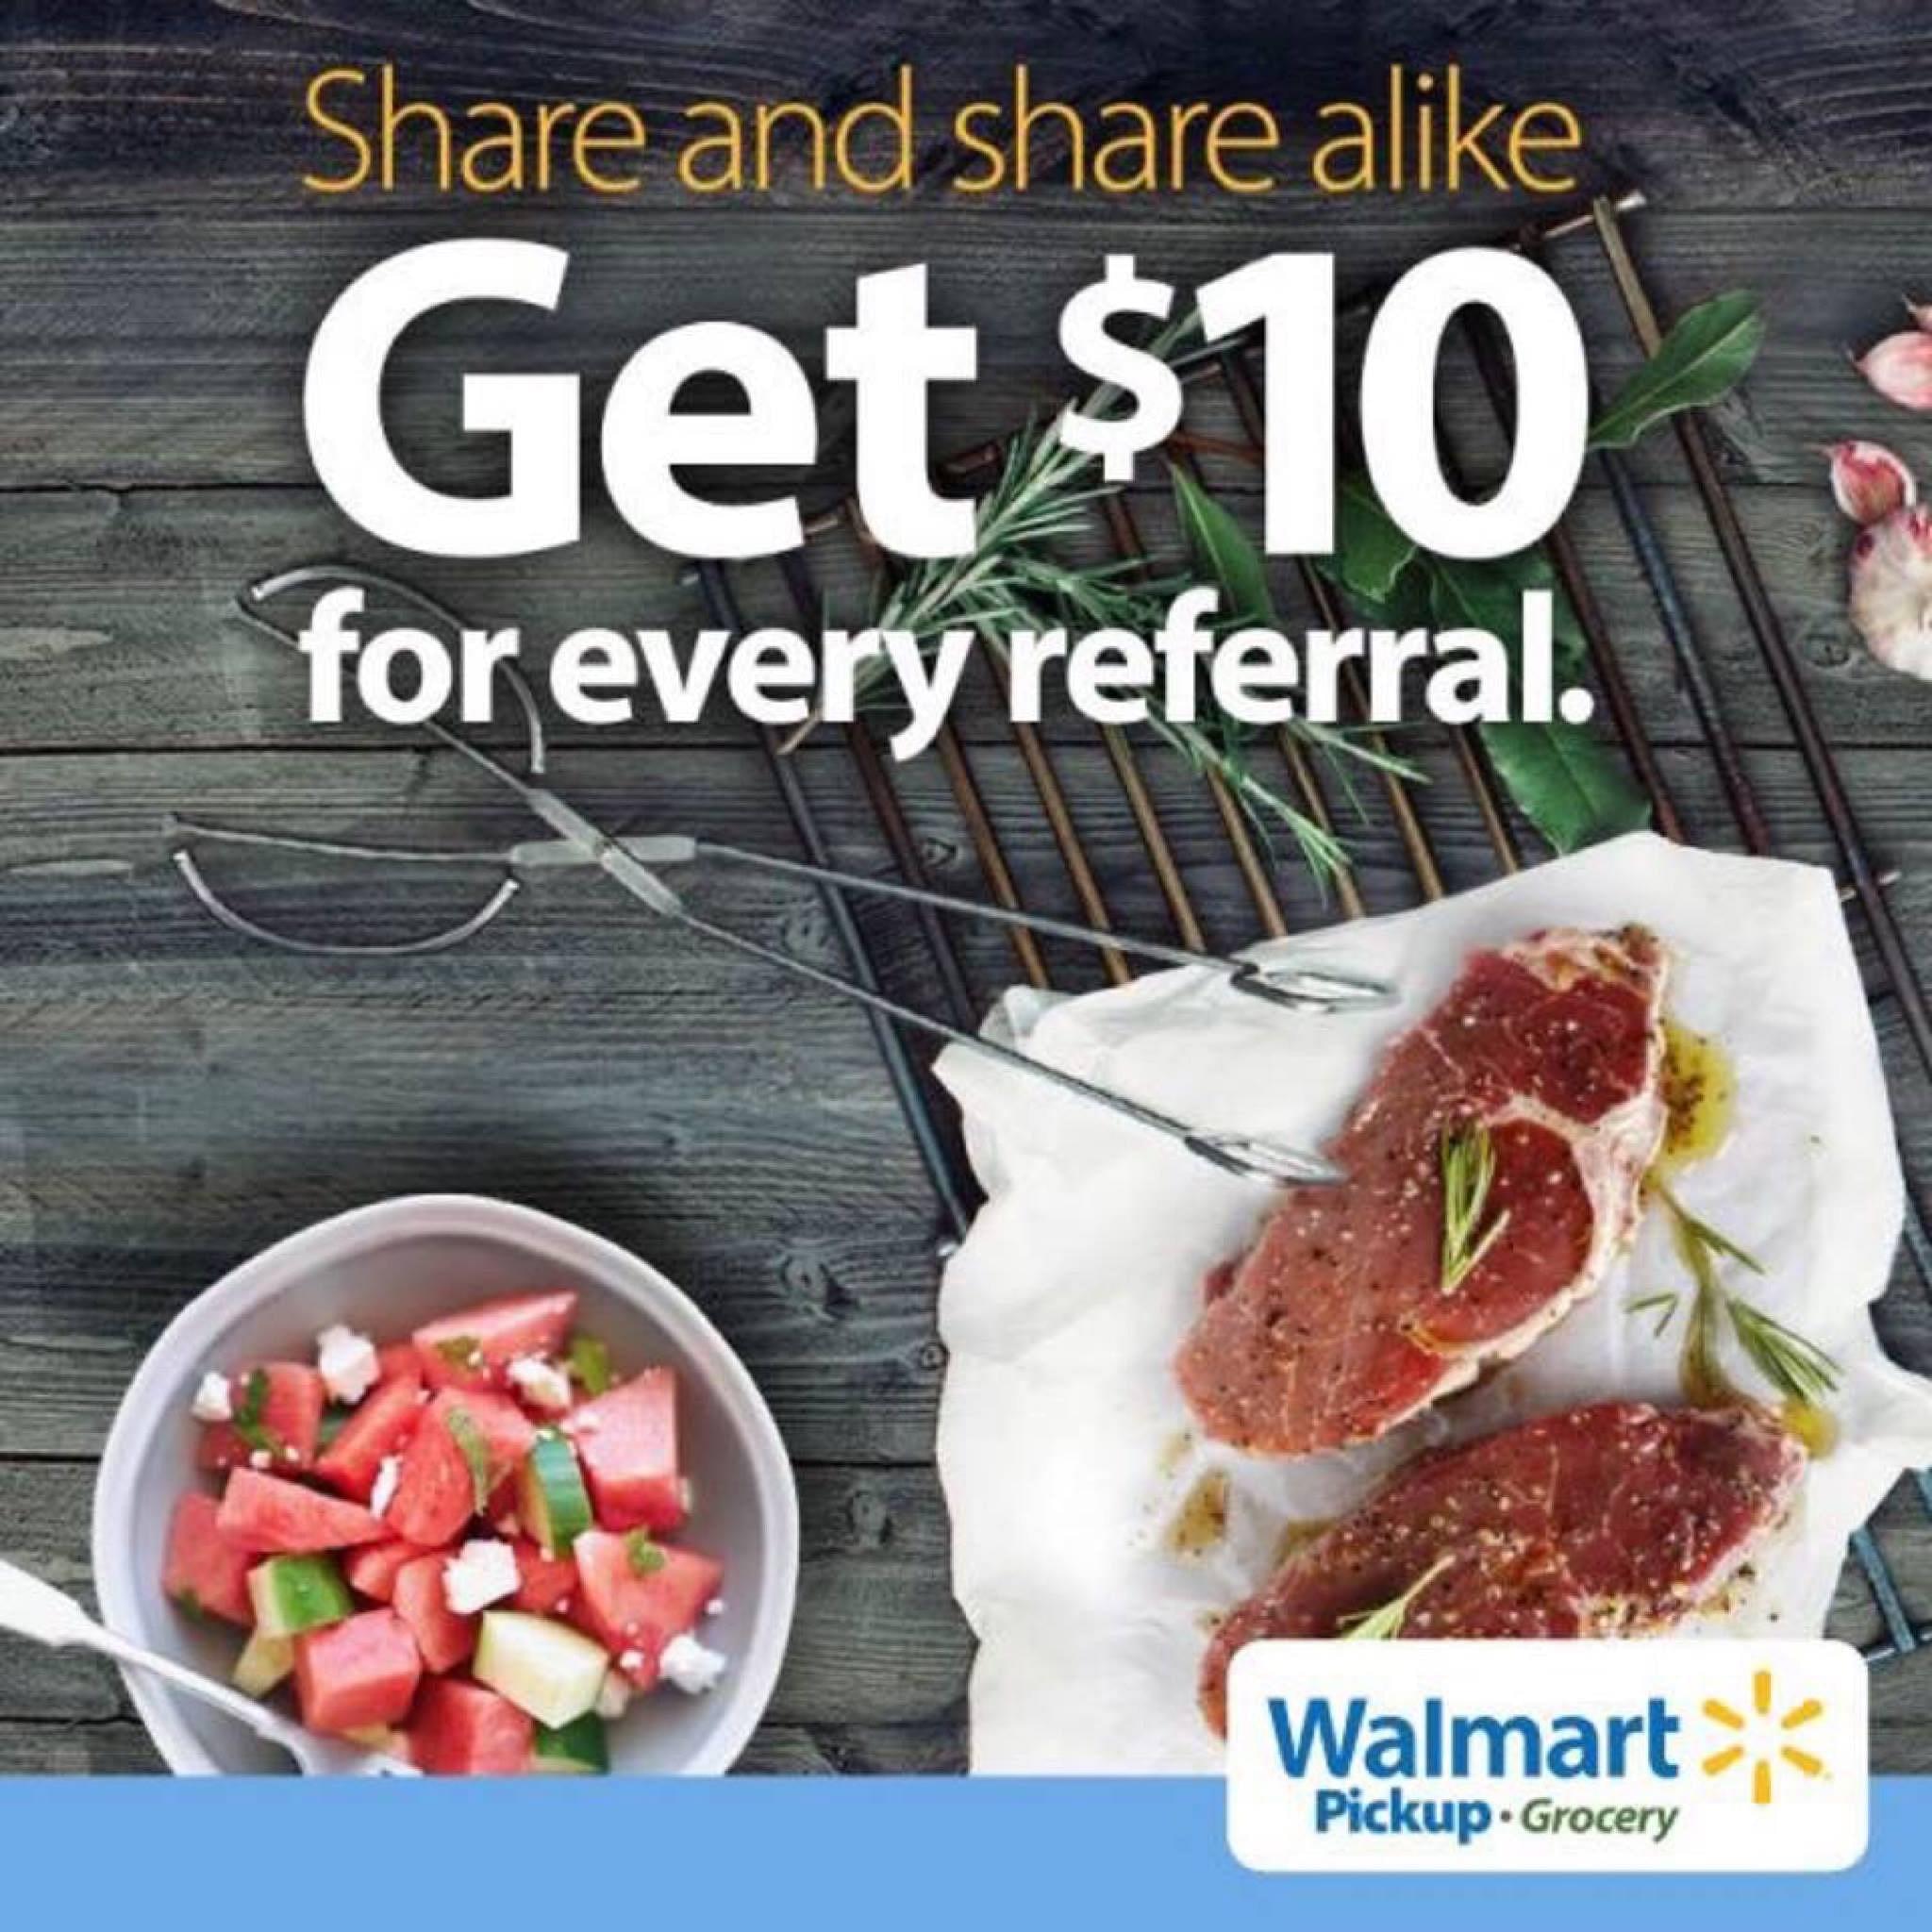 28-promo-code-for-walmart-grocery-pickup-february-images-promowalls